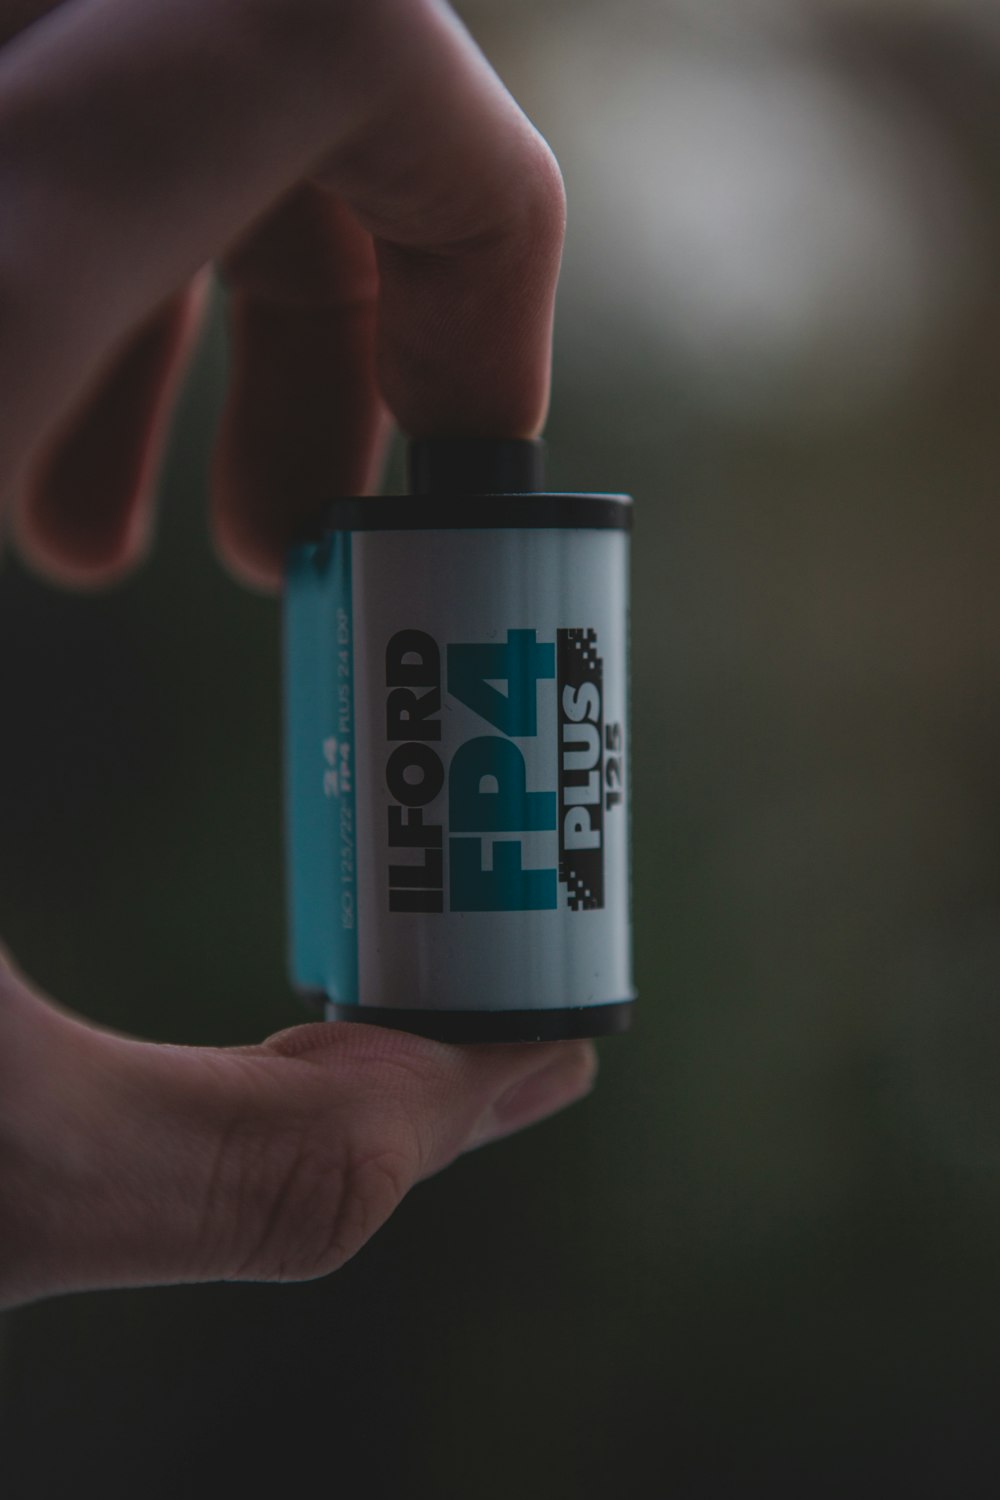 Ilford Fp4 plus container